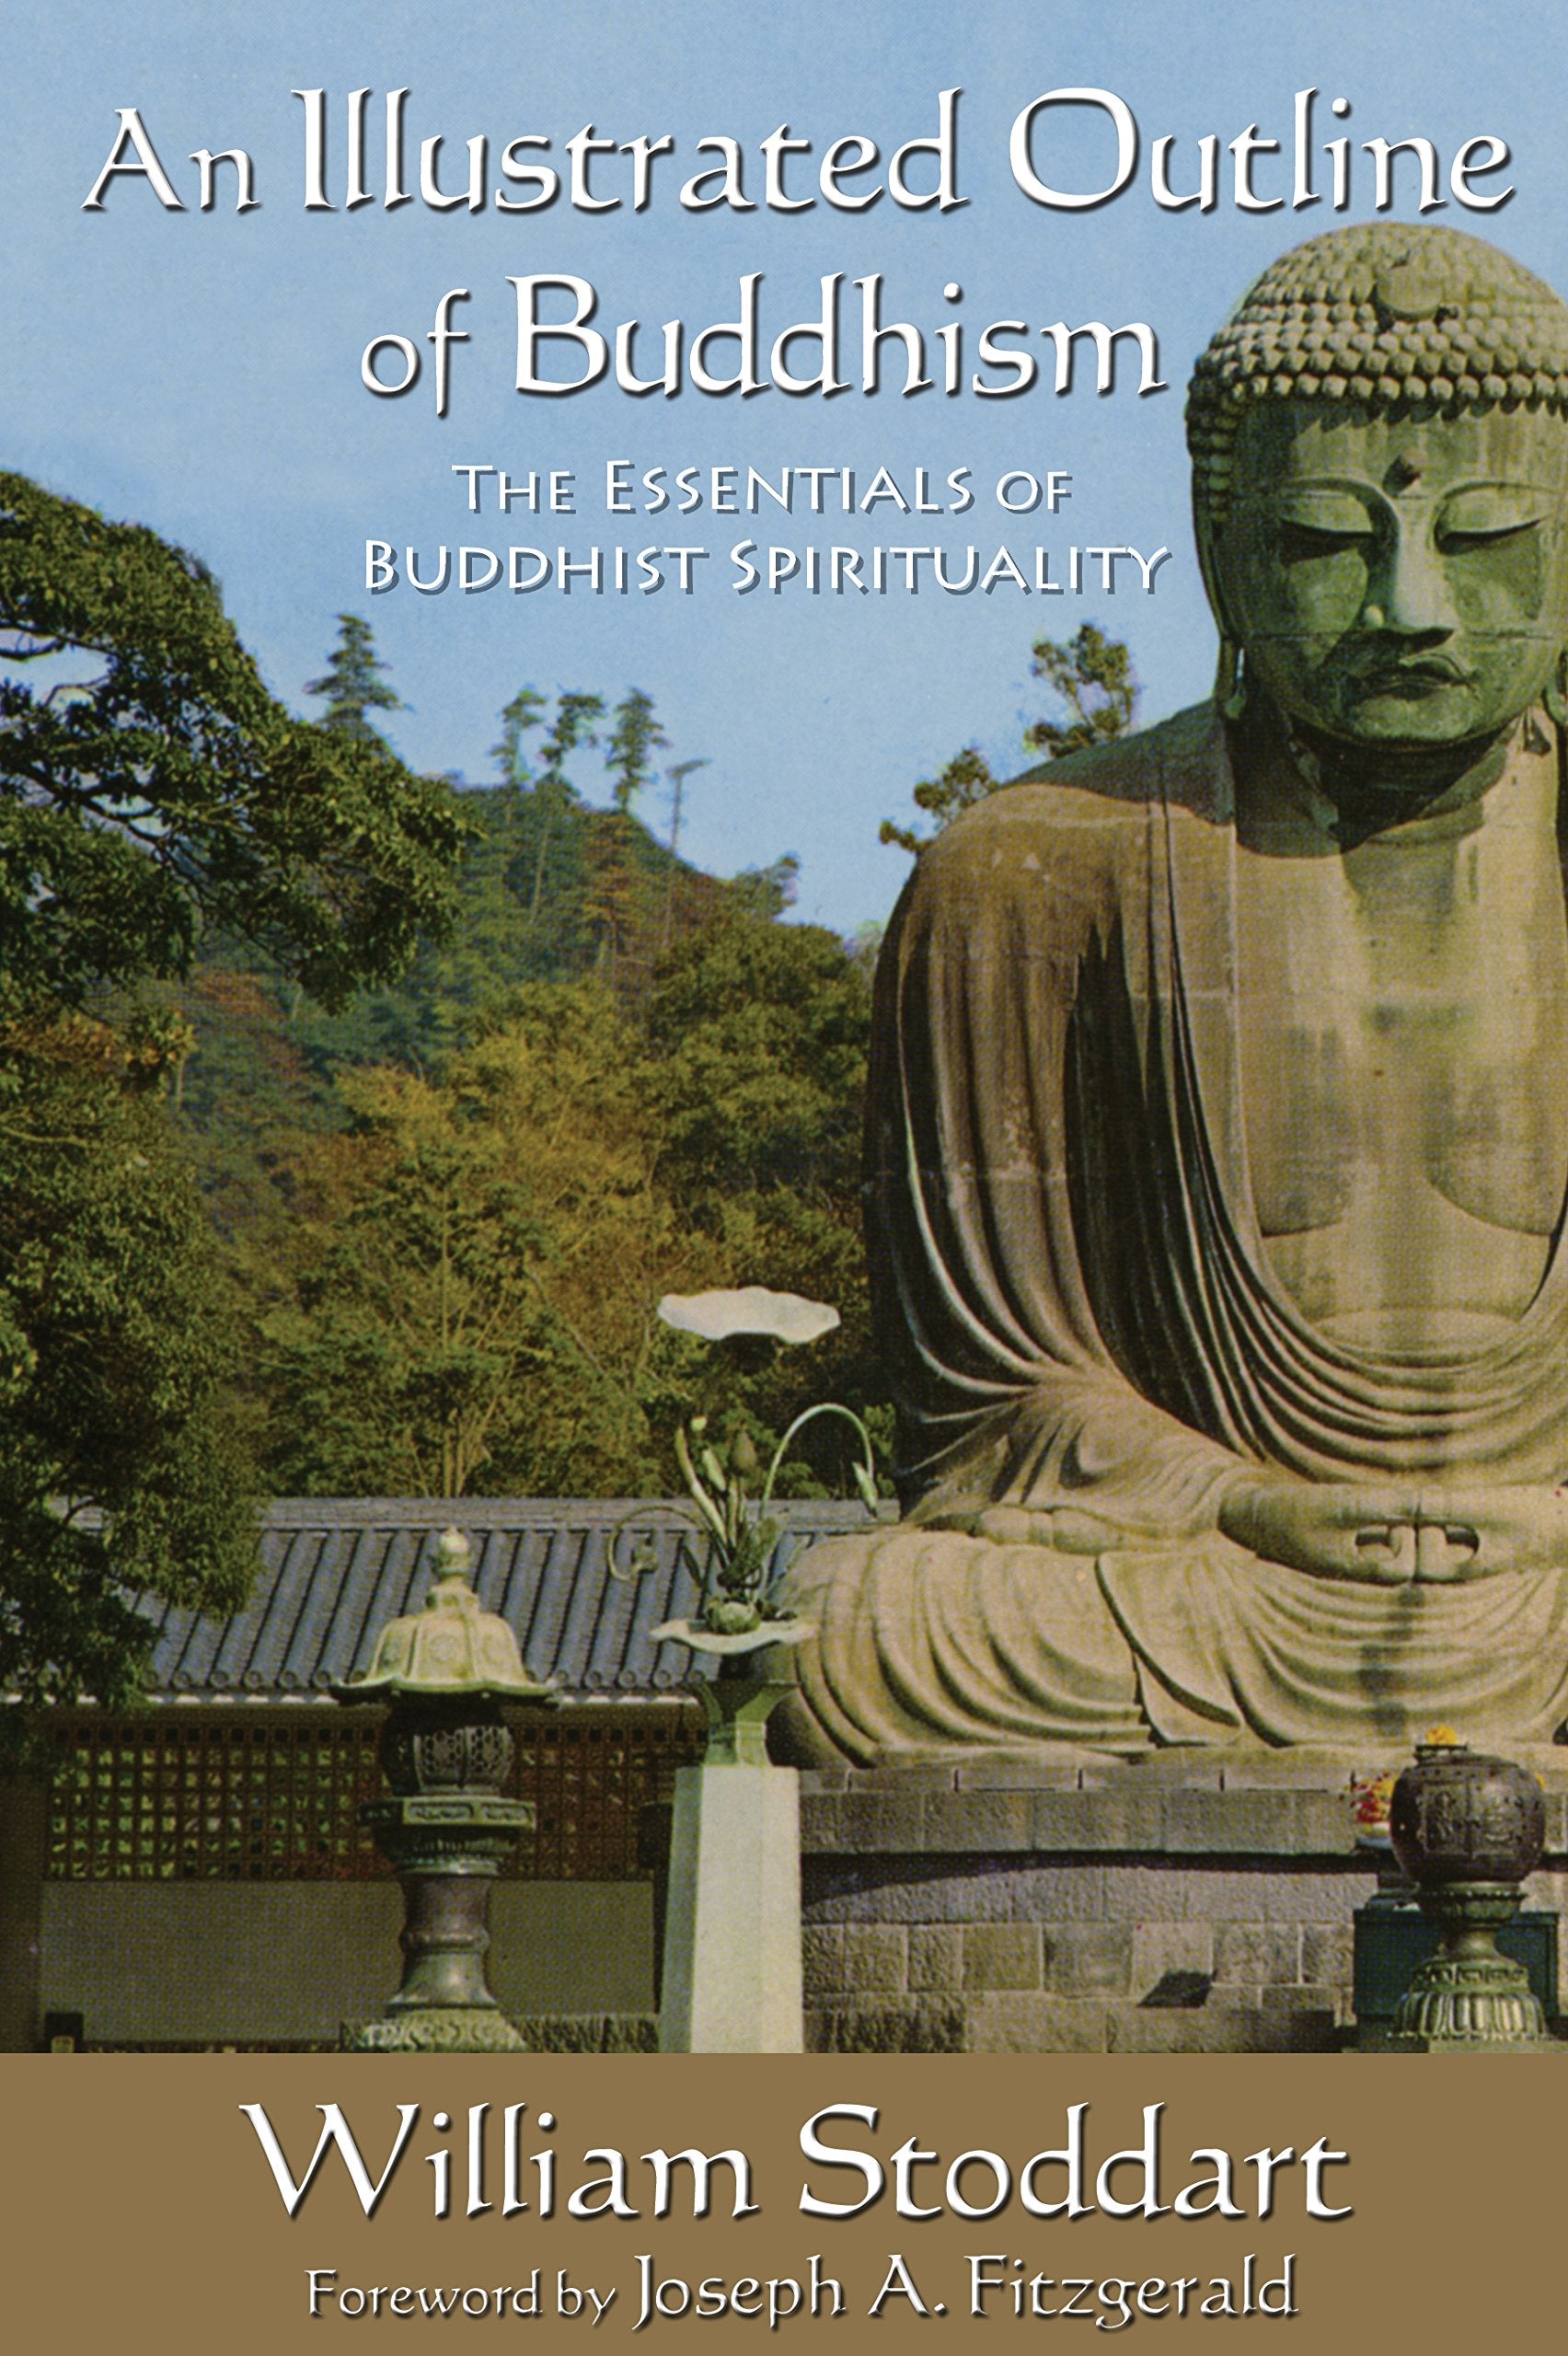 An Illustrated Outline of Buddhism: The Essentials of Buddhist Spirituality